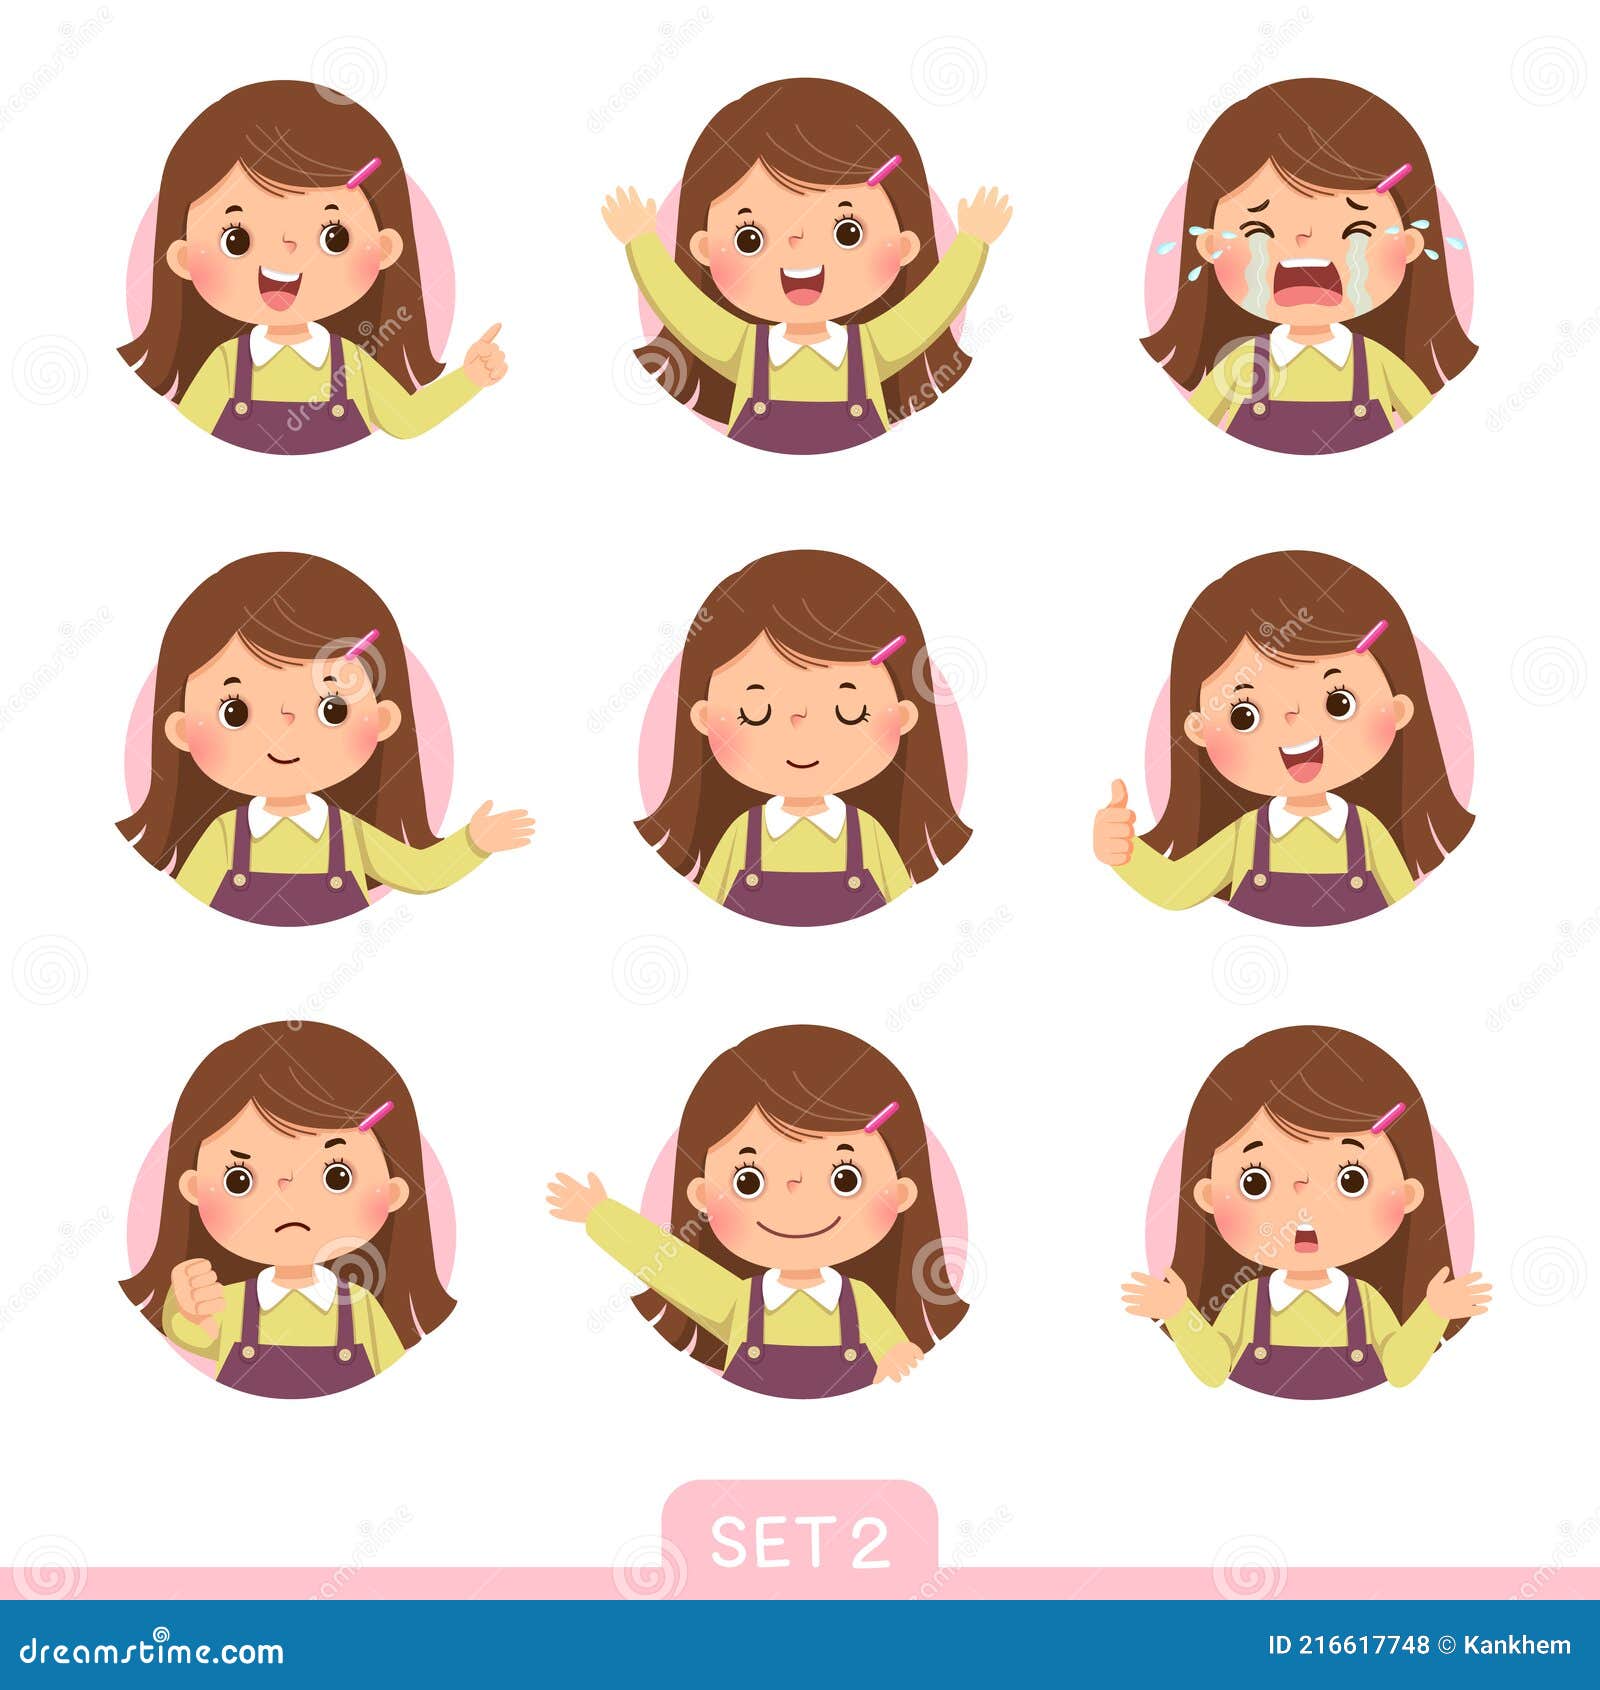 cartoon set of a little girl in different postures with various emotions. set 2 of 3